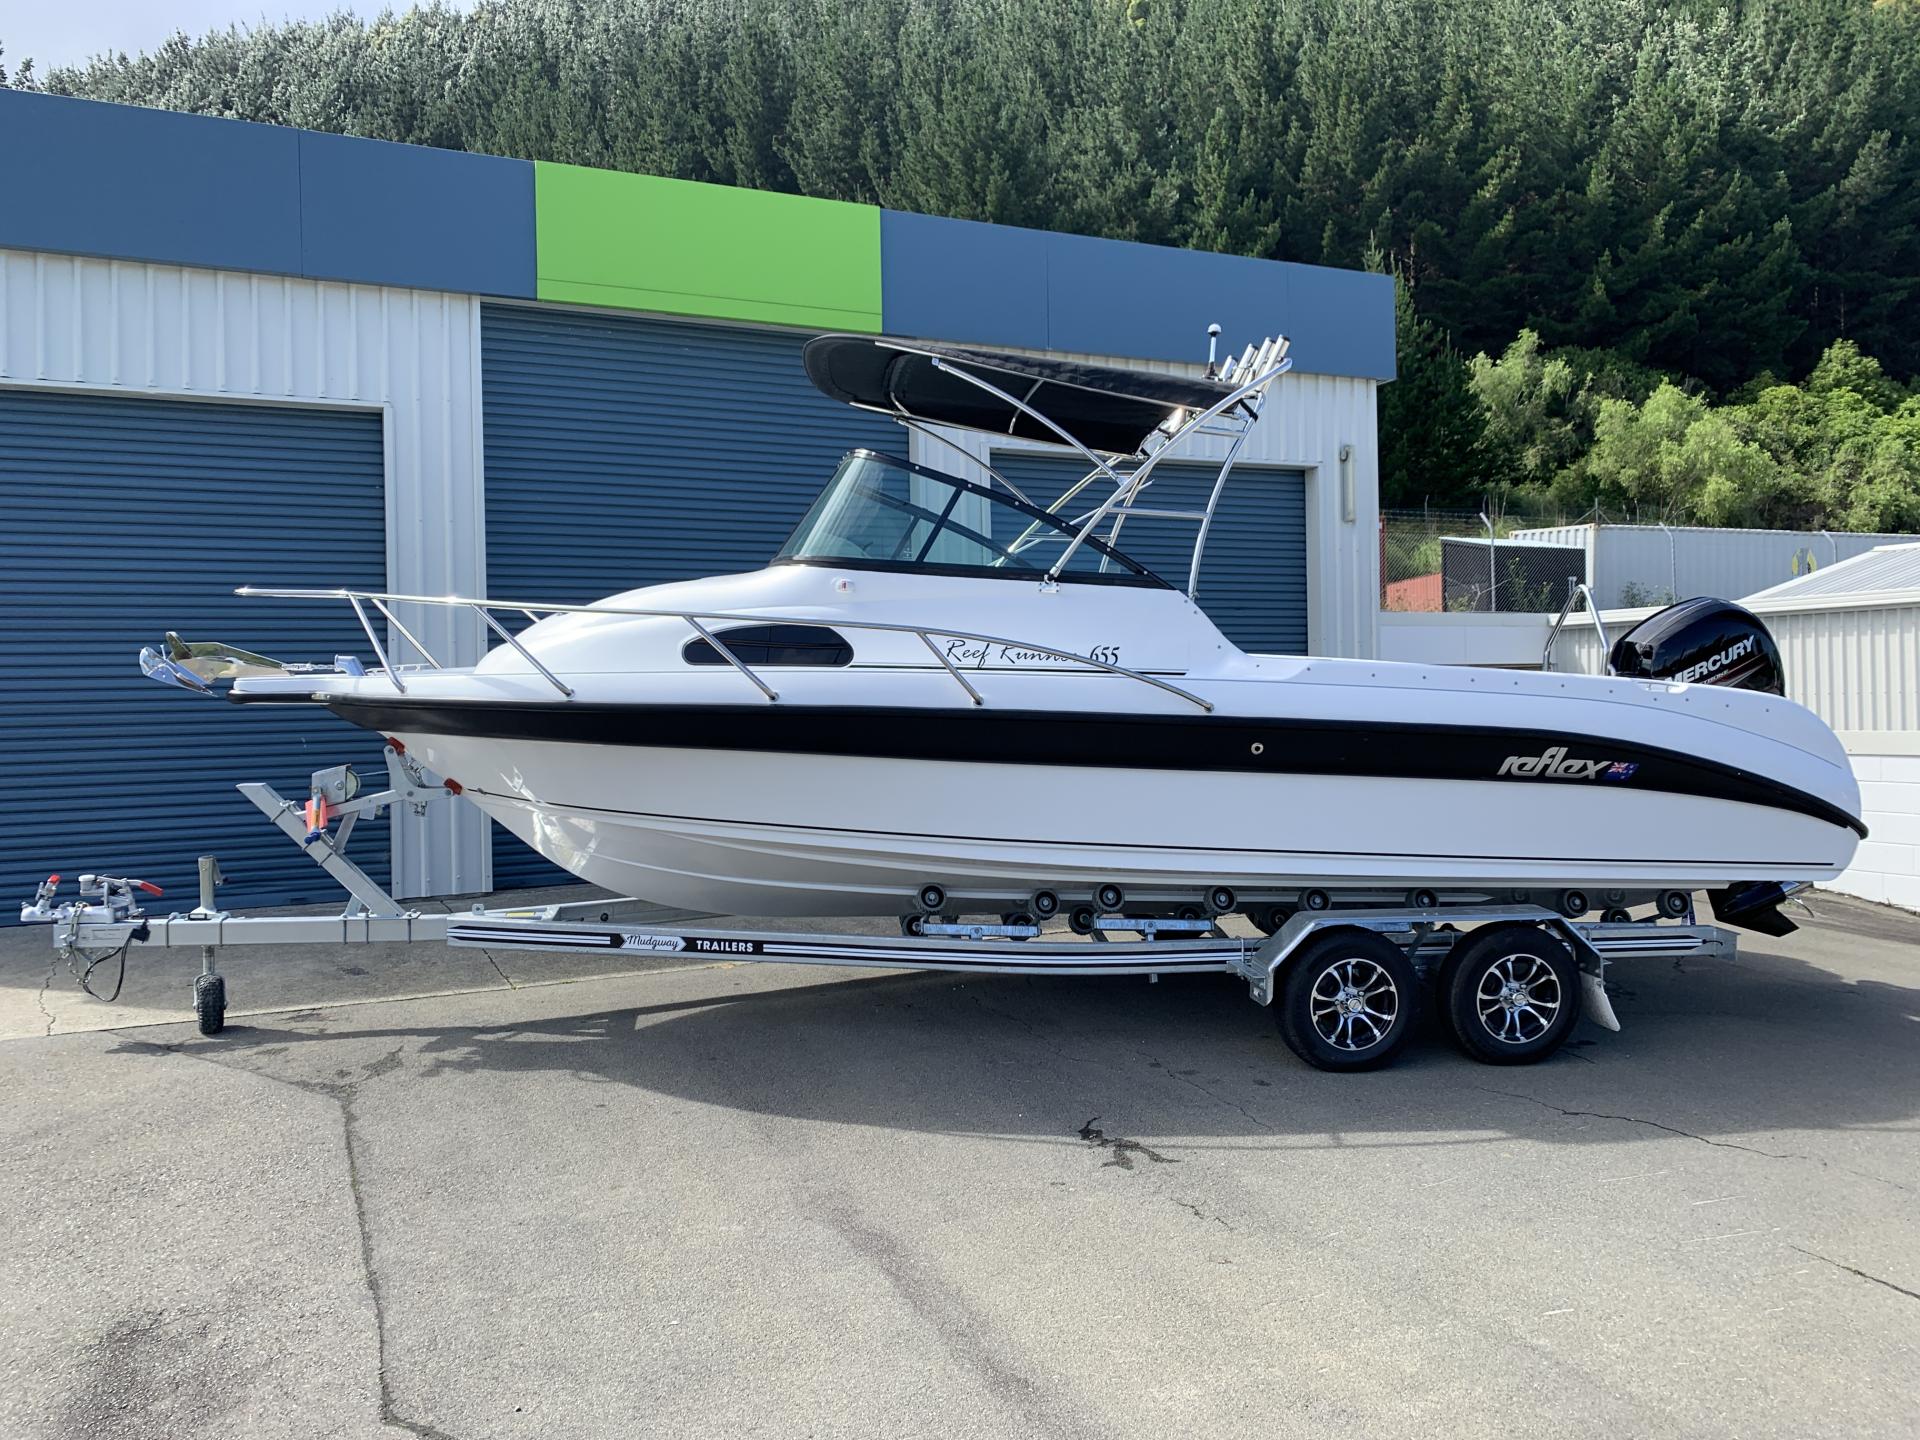 Reflex Reef Runner 655 - Boats, Outboards & Accessories - Boat City  Wellington